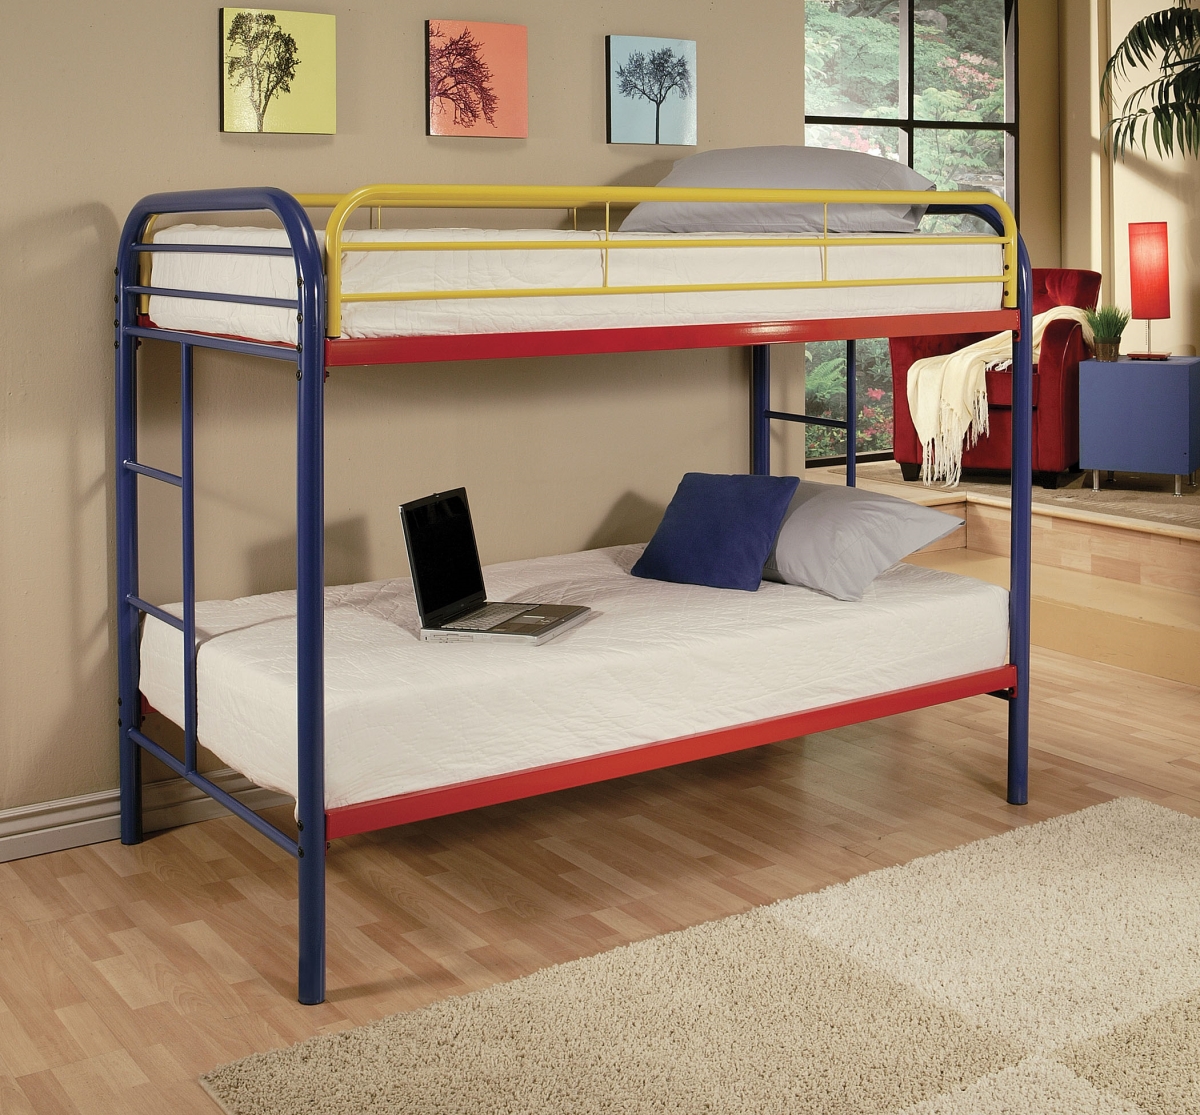 Home Roots Furniture 285200 60 X 78 X 41 In. Metal Tube Twin Bunk Bed - Rainbow